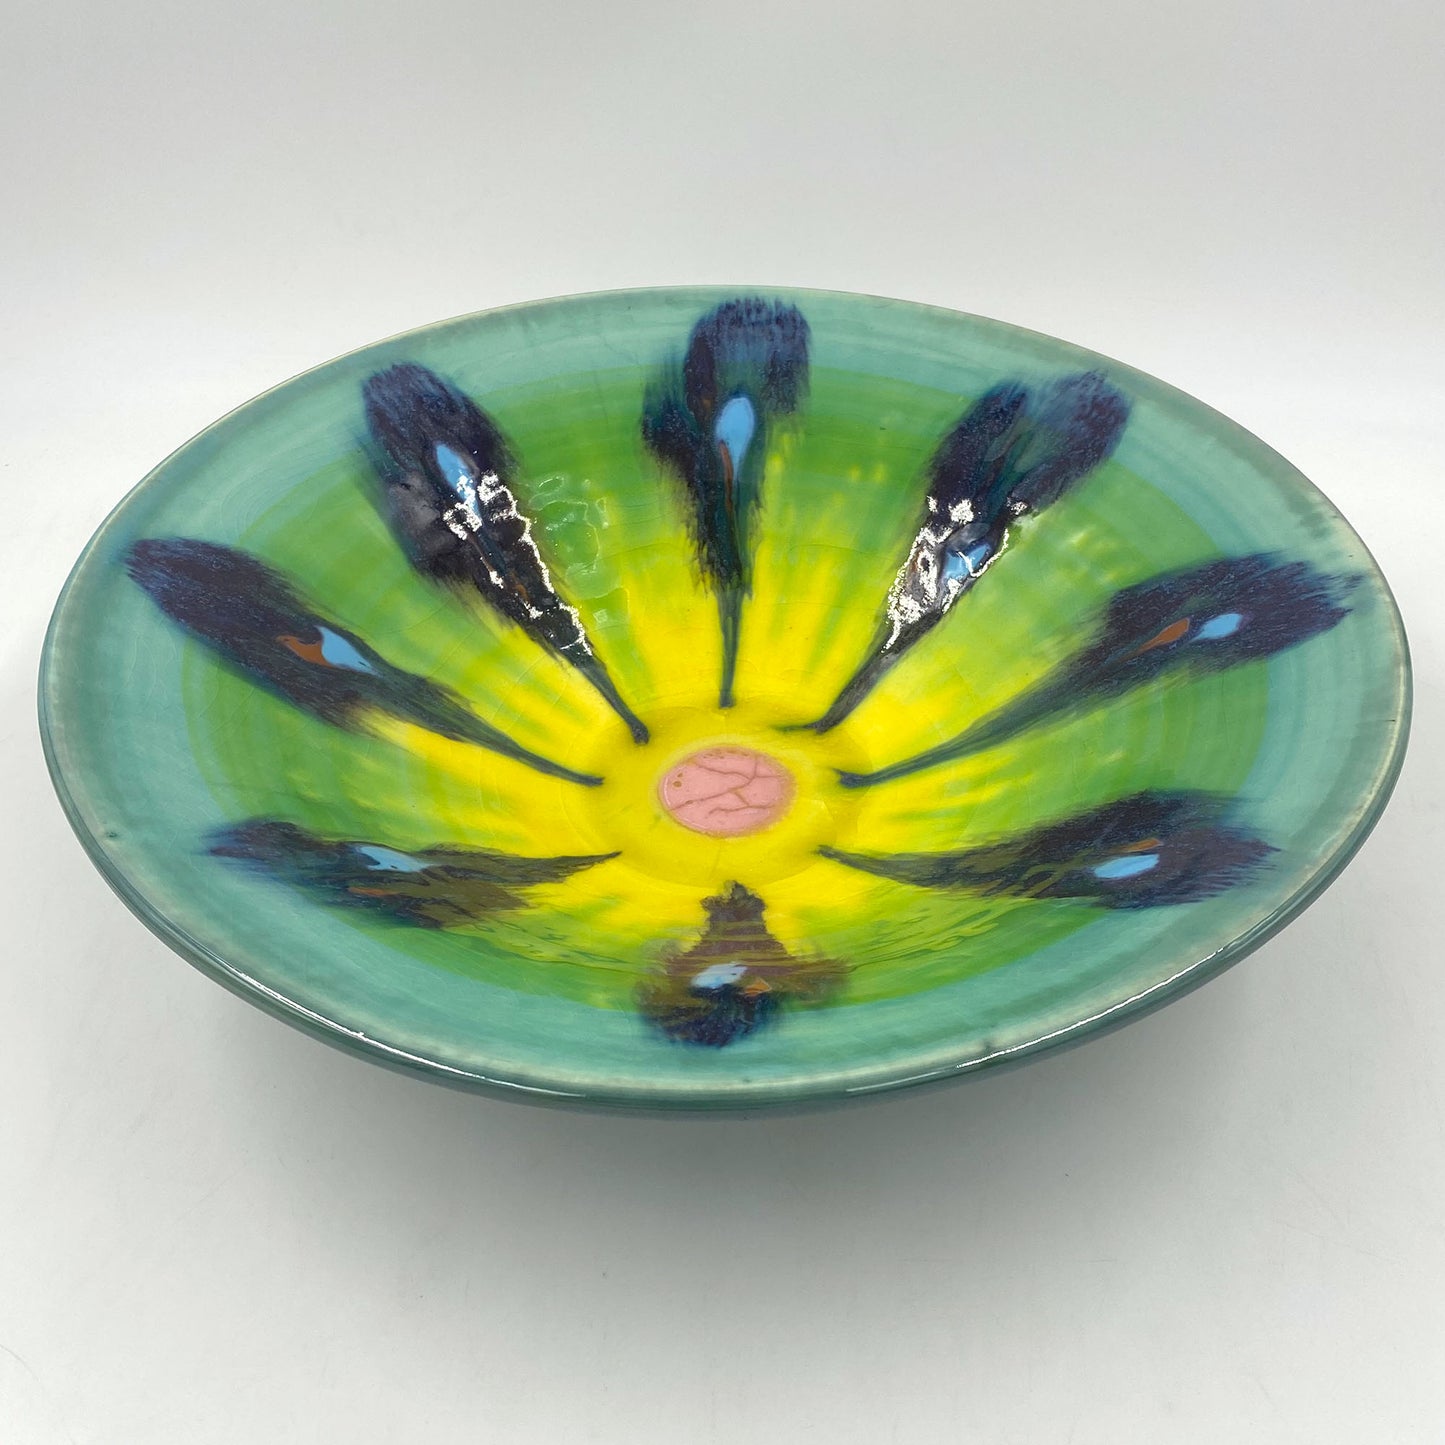 Teal Conical Bowl